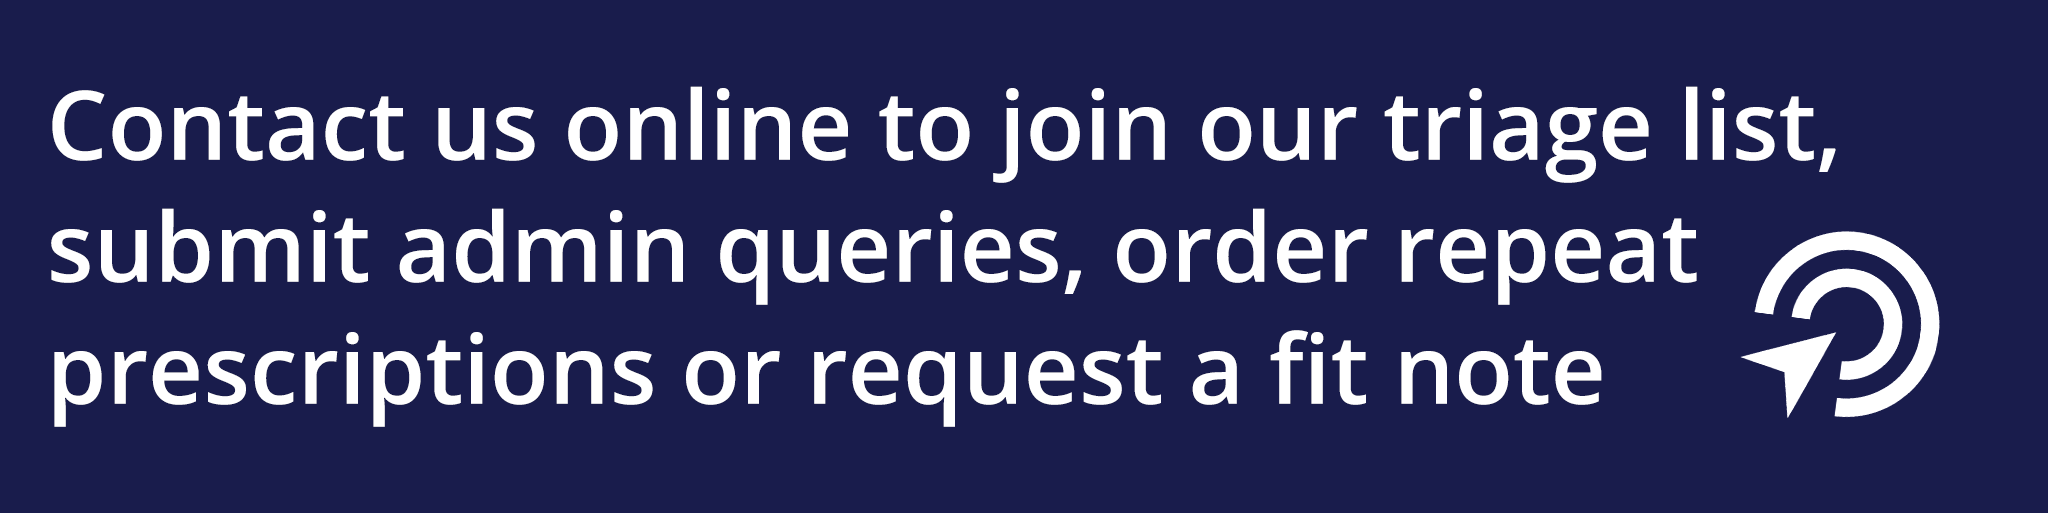 Submit a request to join our triage list, submit admin queries, order repeat prescriptions or request a fit note